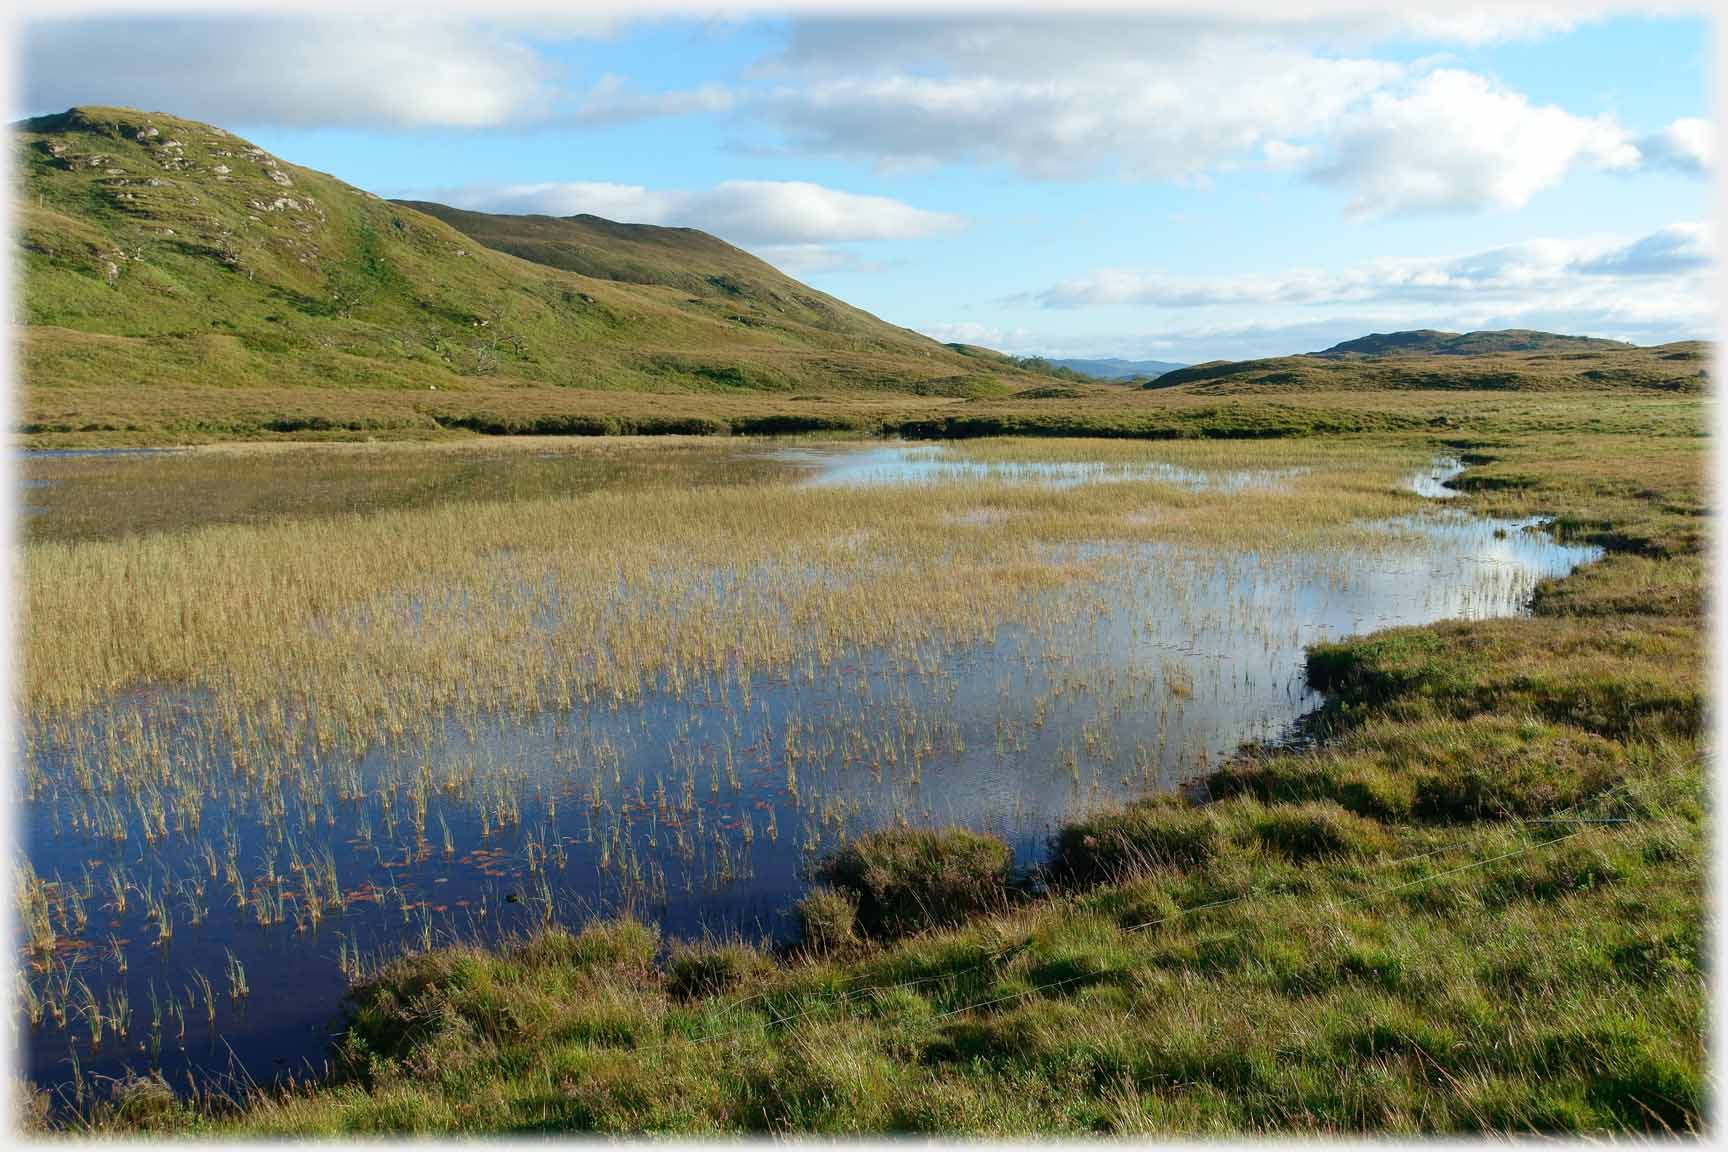 Lochan with reeds.